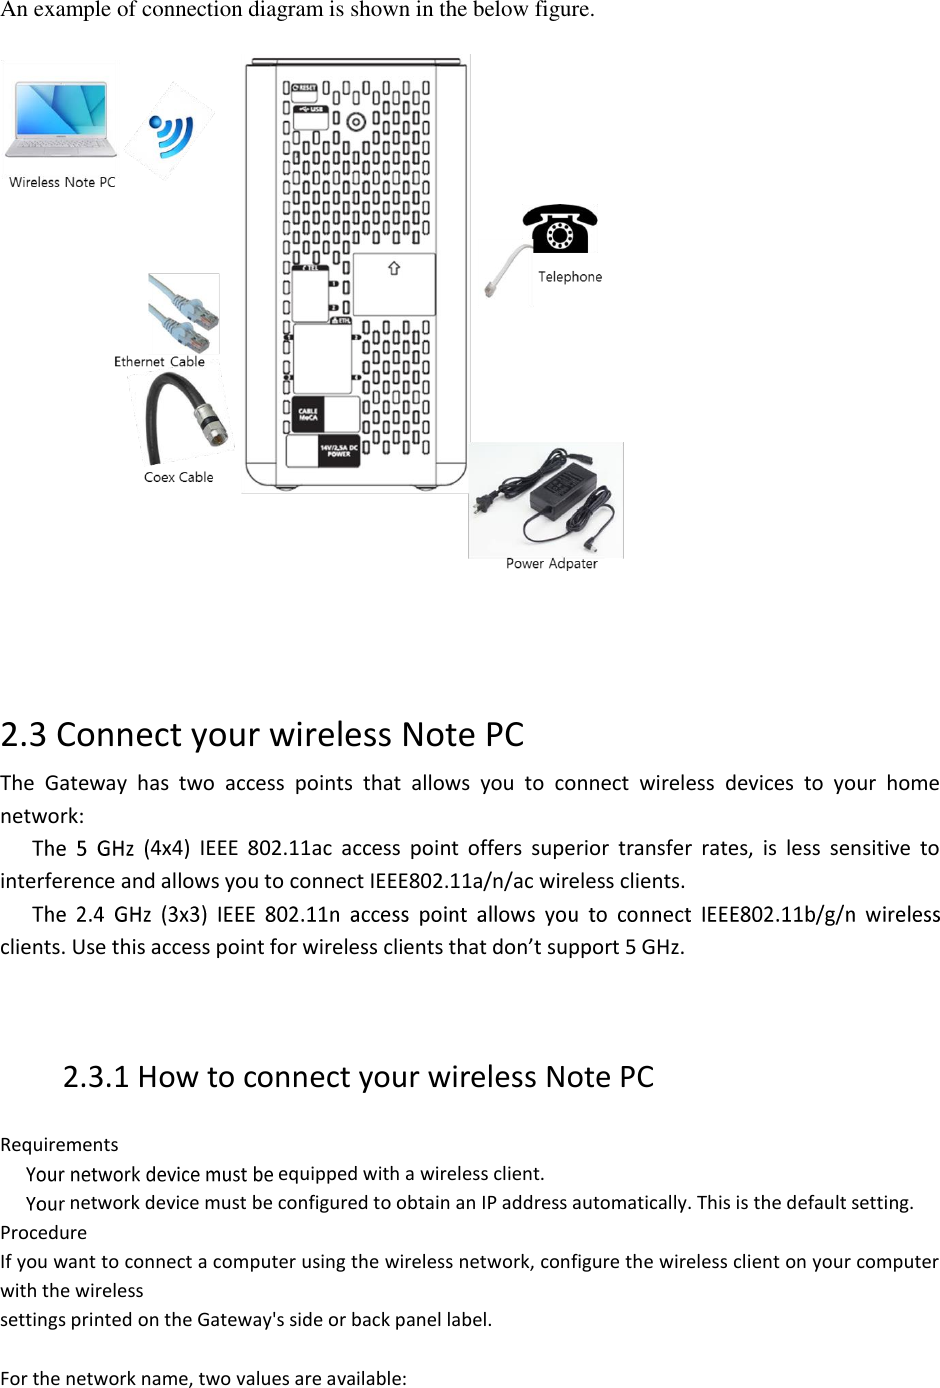 An example of connection diagram is shown in the below figure.       2.3 Connect your wireless Note PC The  Gateway  has  two  access  points  that  allows  you  to  connect  wireless  devices  to  your  home network: 4x4)  IEEE  802.11ac  access  point  offers  superior  transfer  rates,  is  less  sensitive  to interference and allows you to connect IEEE802.11a/n/ac wireless clients. clients. Use this access point for wireless clients that don’t support 5 GHz.    2.3.1 How to connect your wireless Note PC  Requirements  equipped with a wireless client.  network device must be configured to obtain an IP address automatically. This is the default setting. Procedure If you want to connect a computer using the wireless network, configure the wireless client on your computer with the wireless settings printed on the Gateway&apos;s side or back panel label.  For the network name, two values are available: 